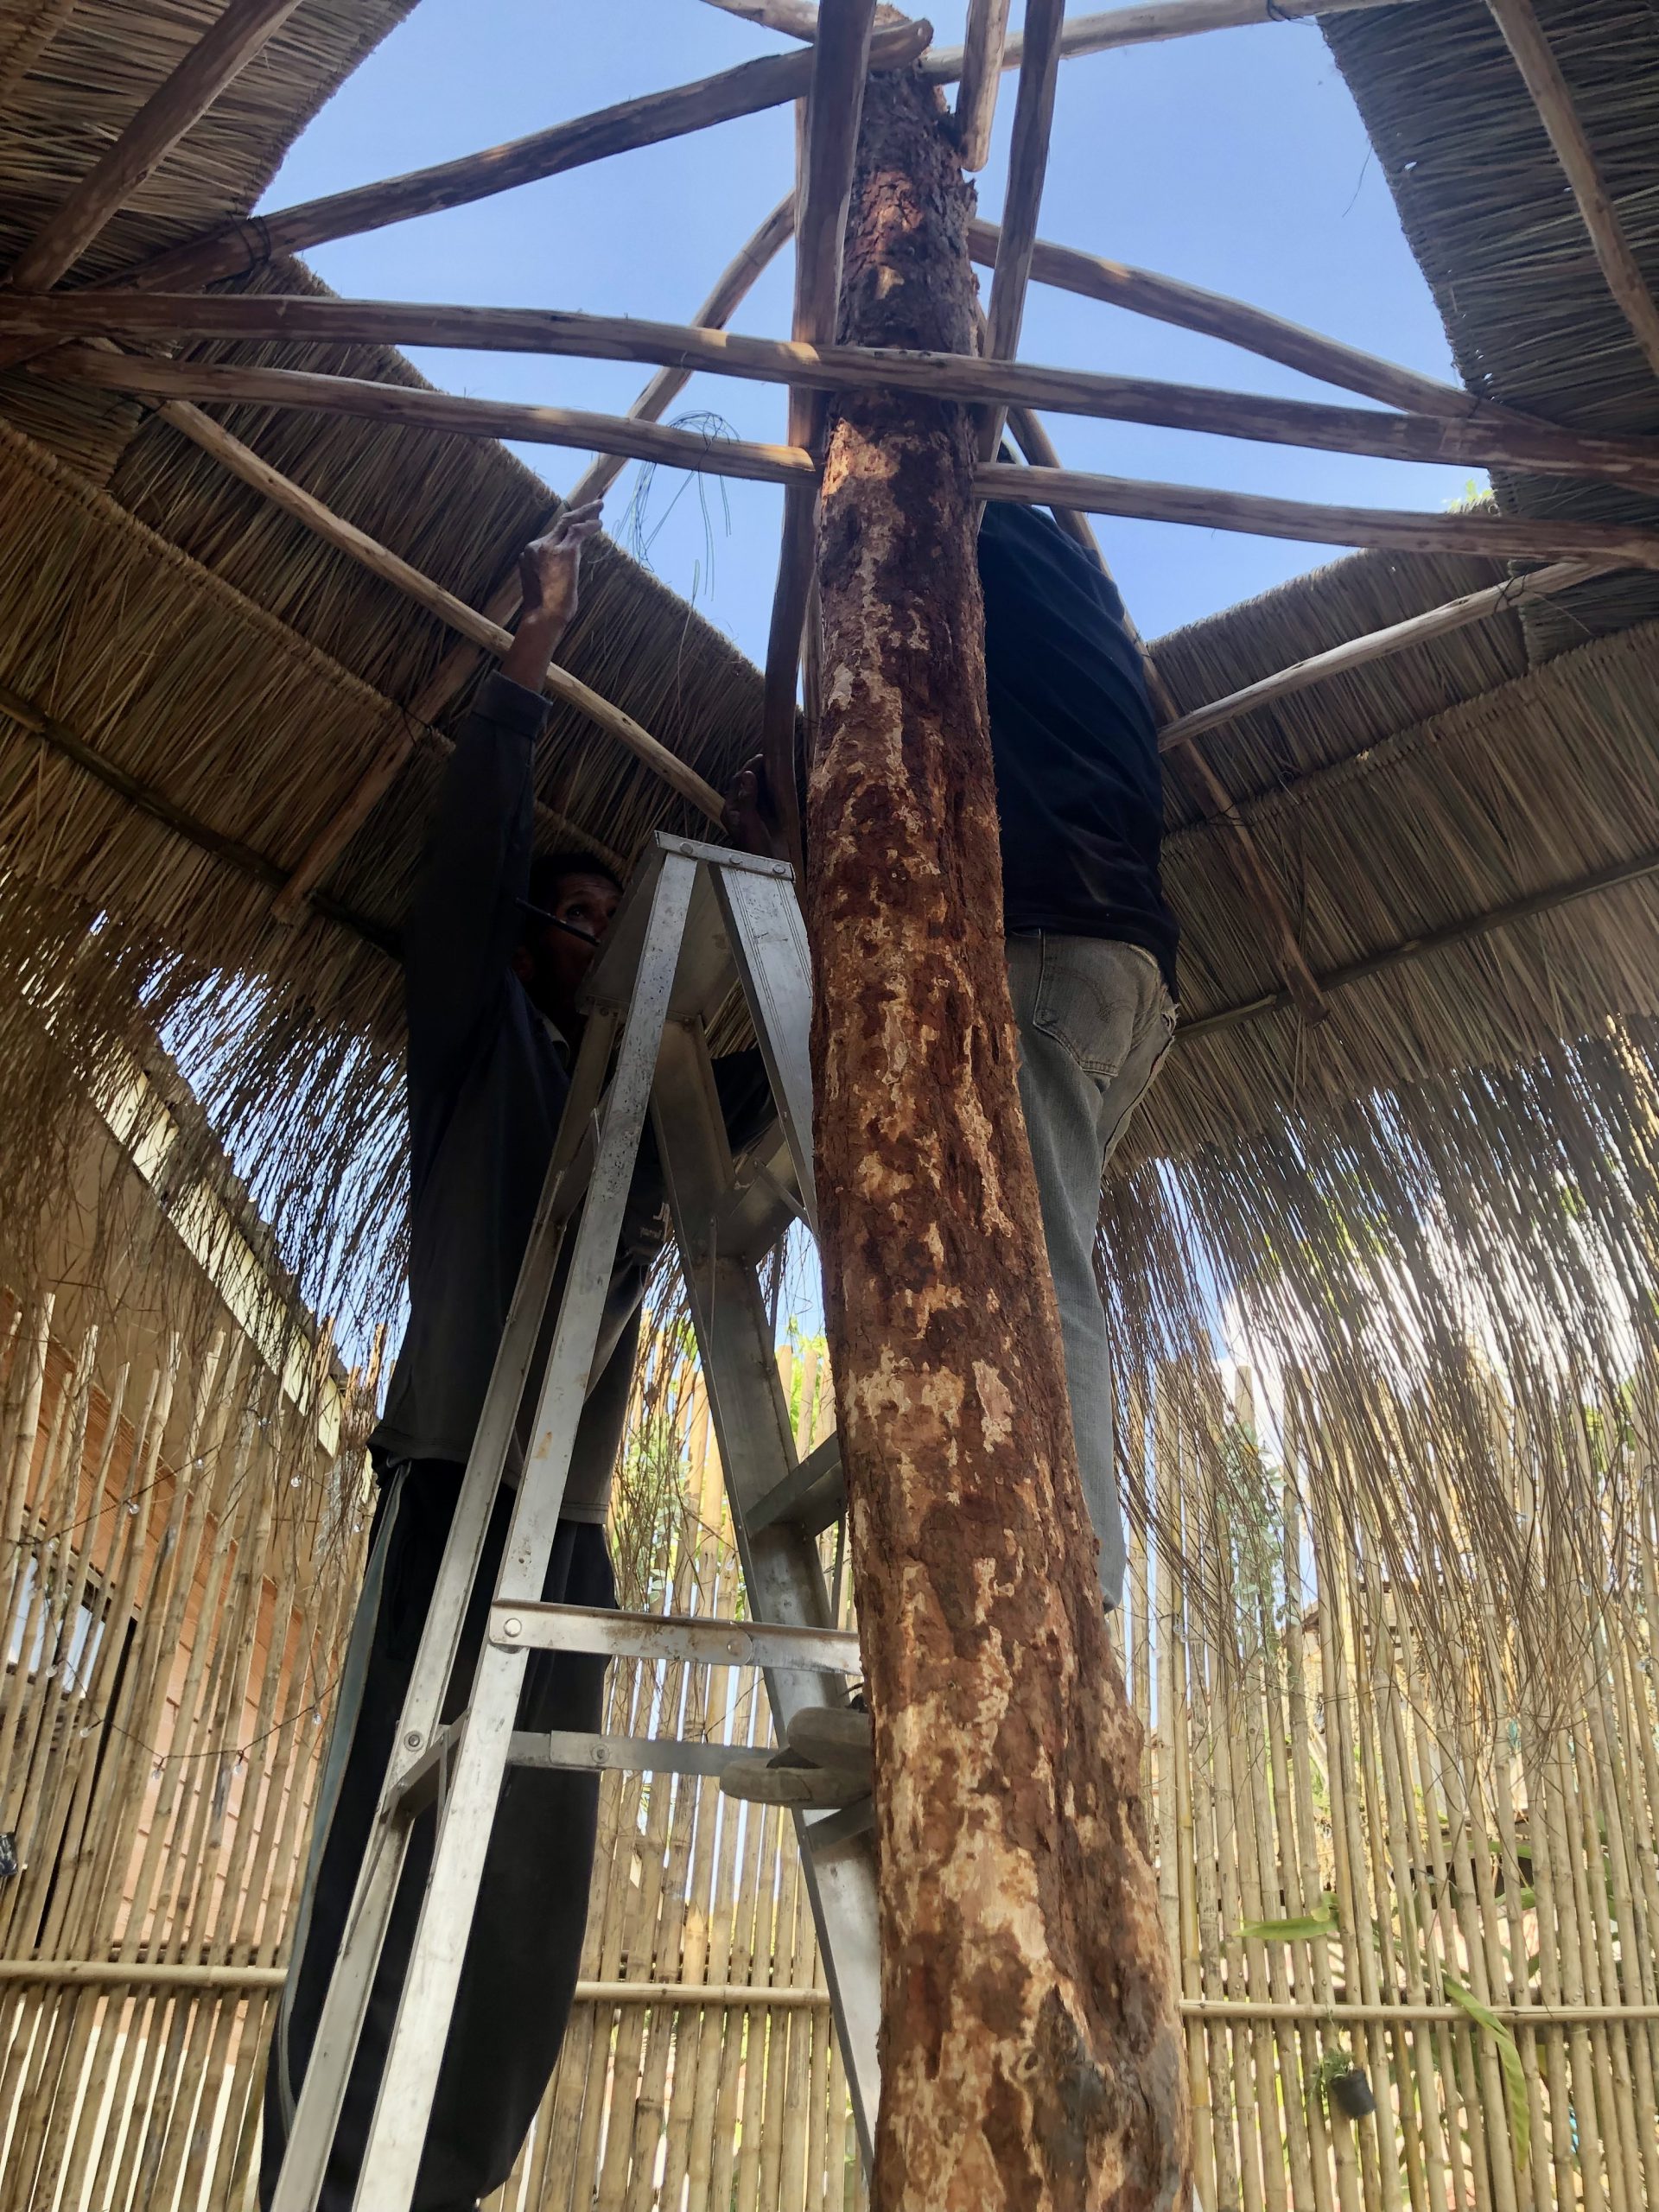 Closing the bamboo roof